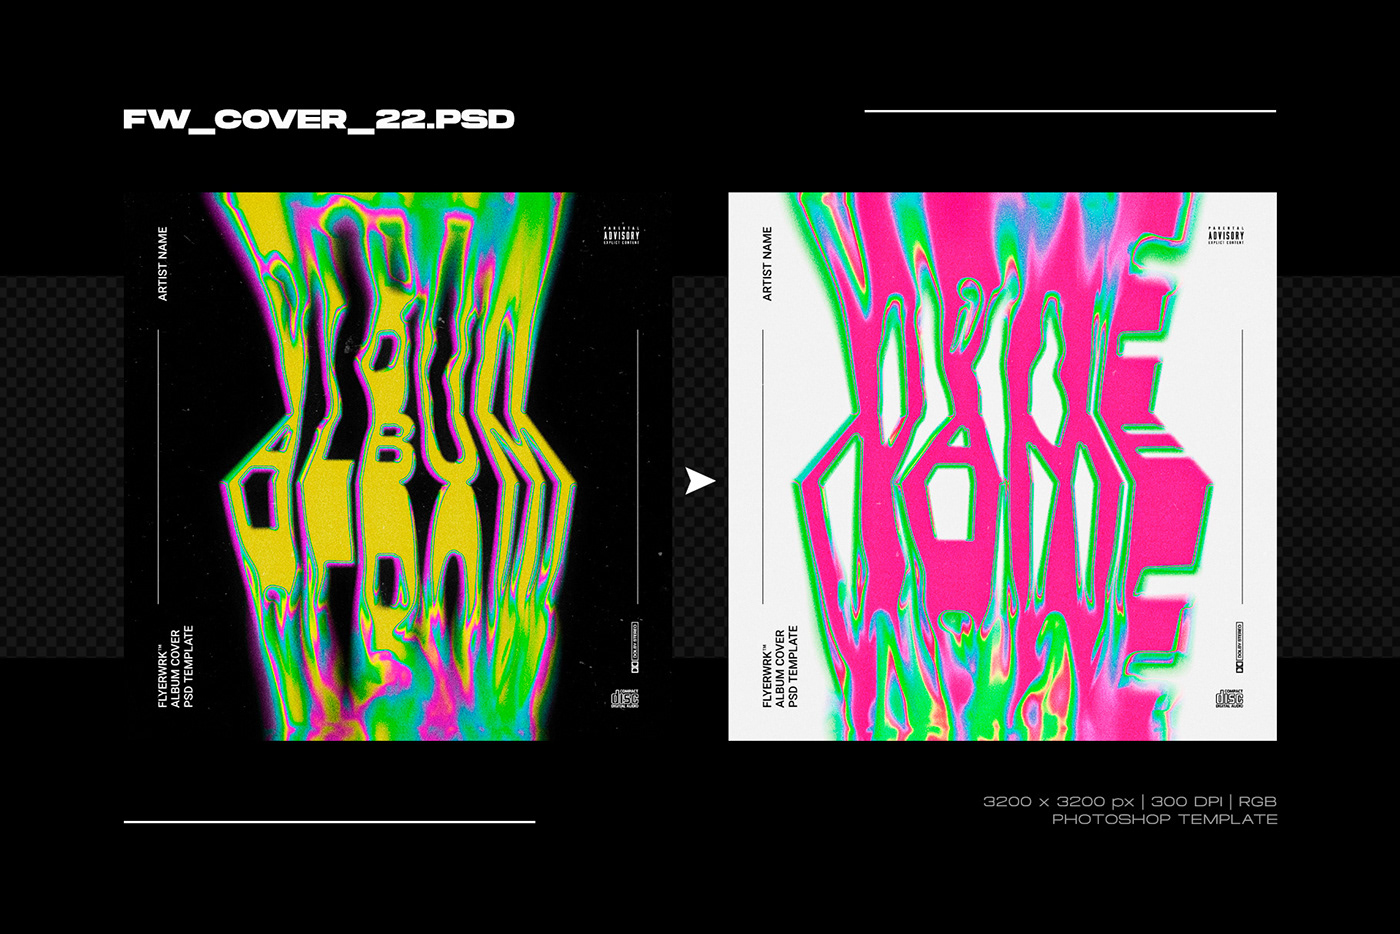 Album cover design Glitch melted photoshop podcast template text vinyl